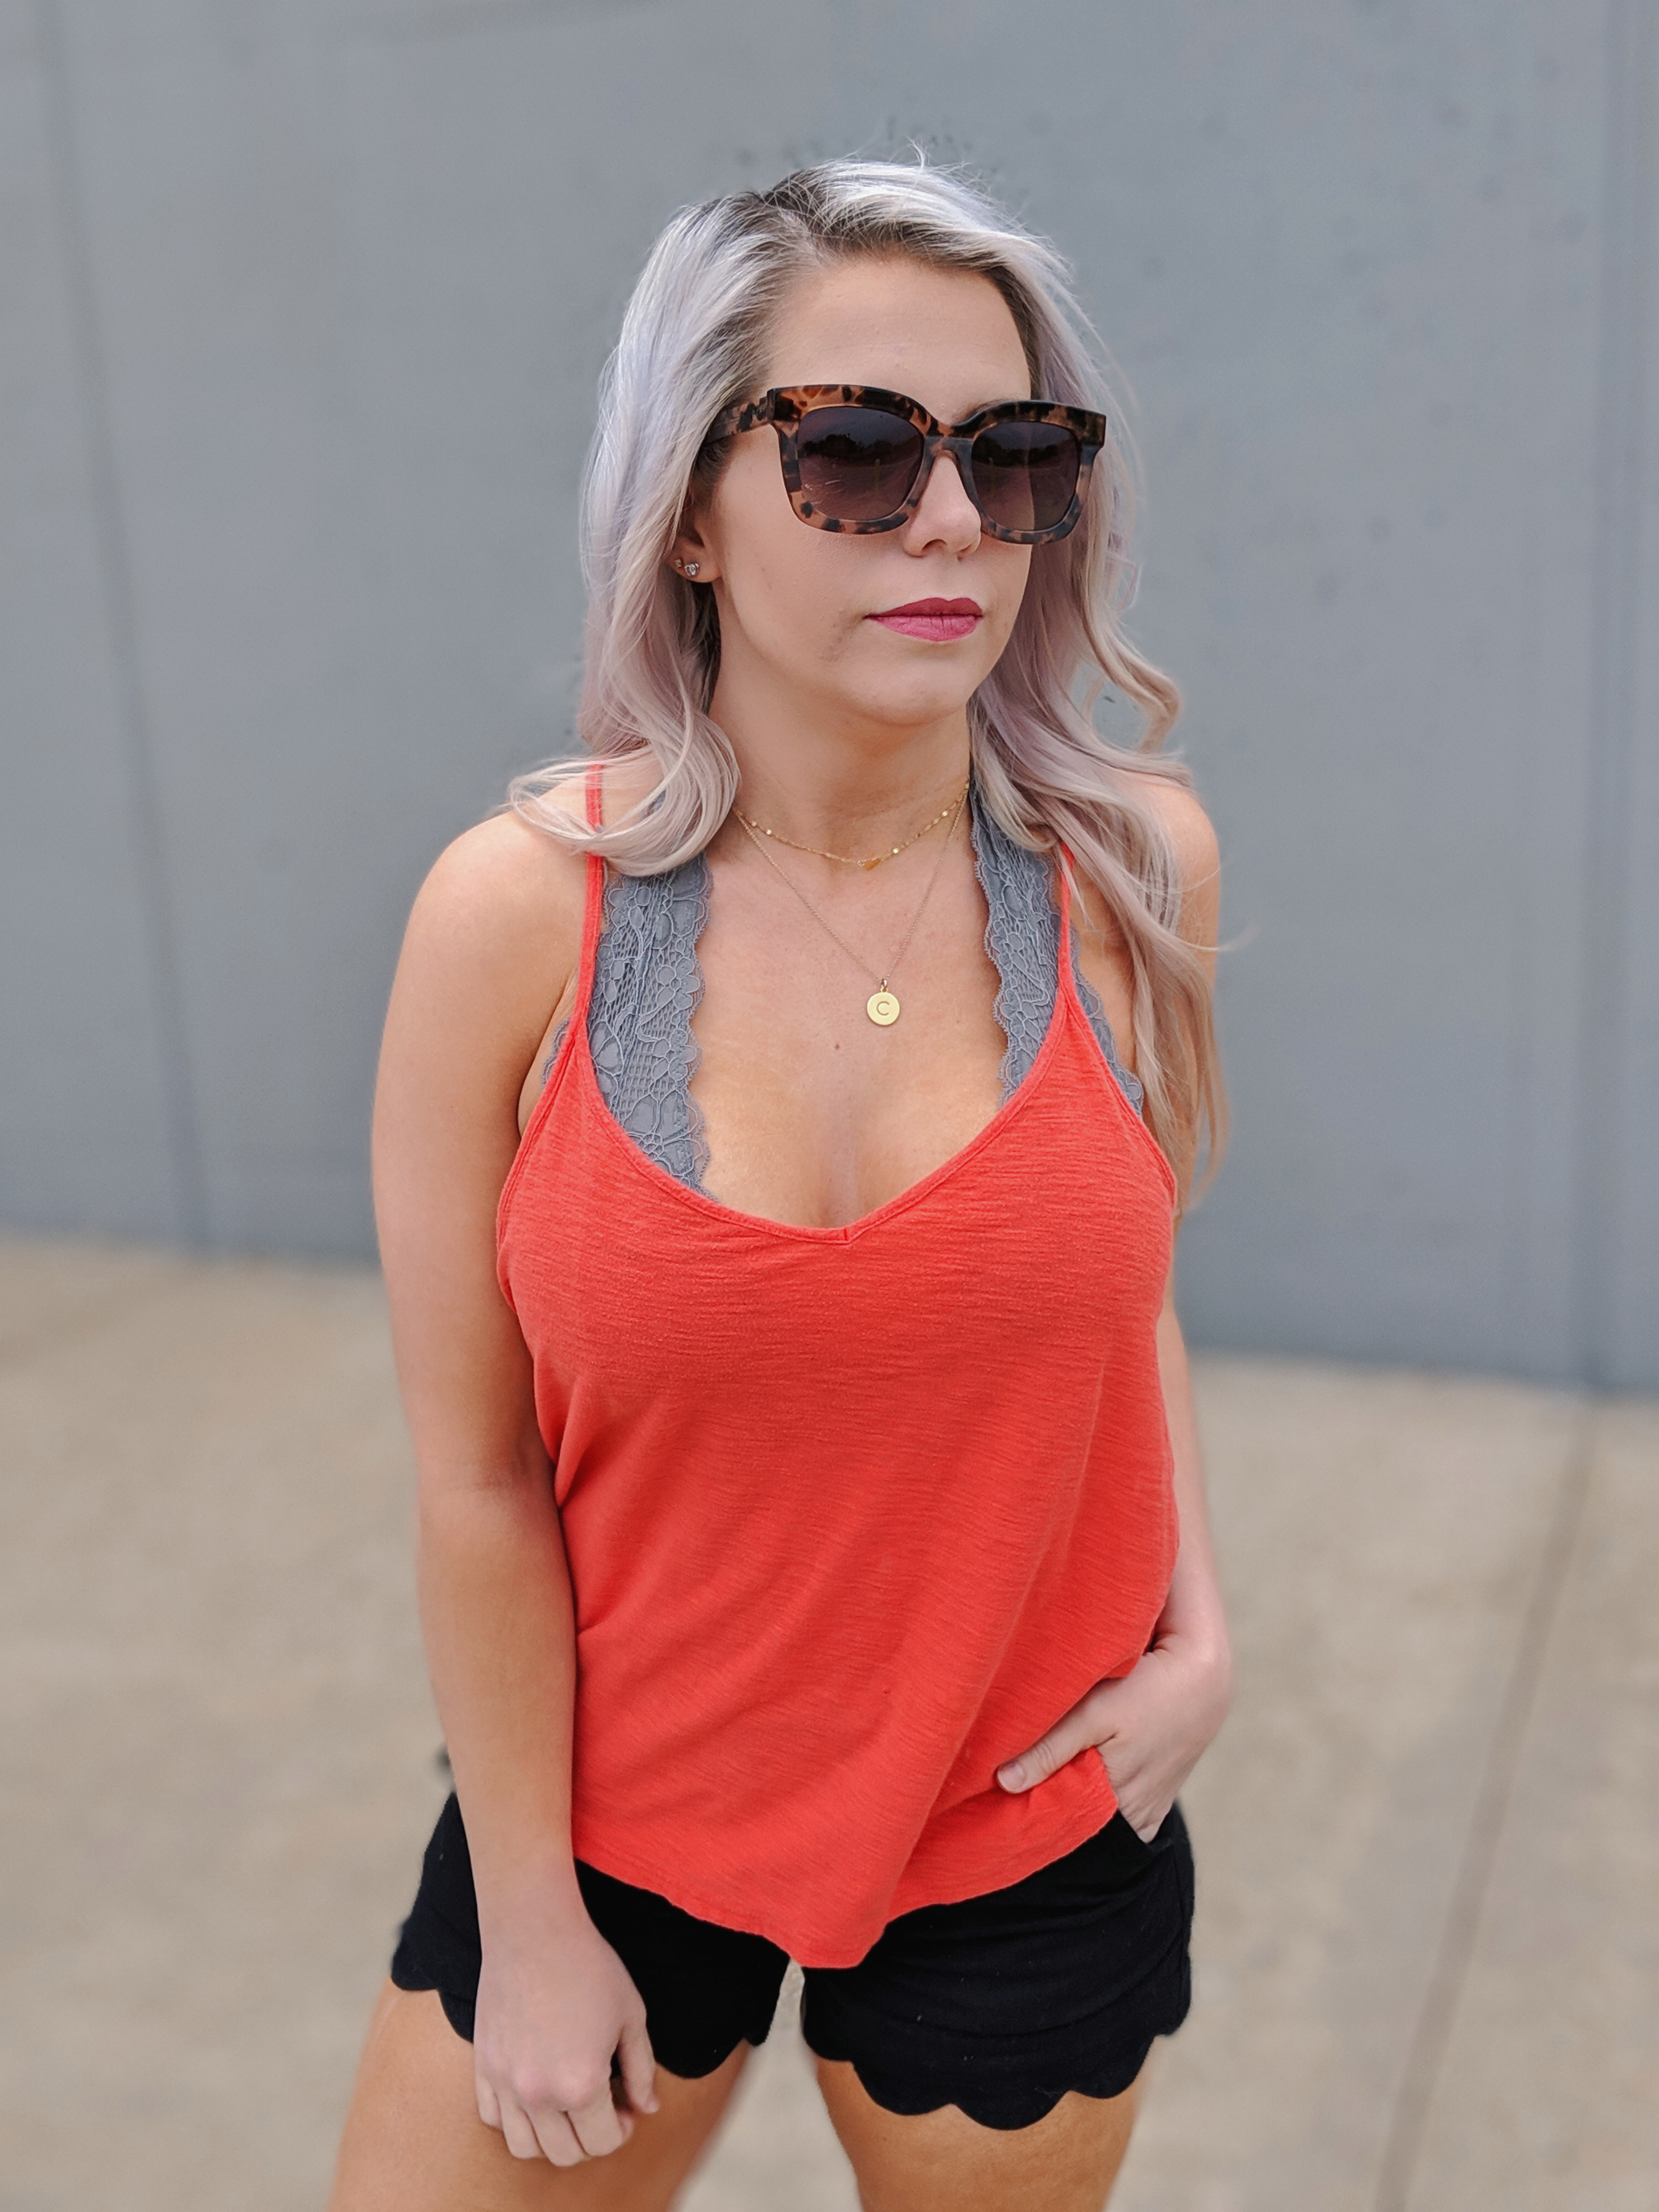 Halter Bralette Outfit Ideas: Halter bralette outfits perfect for all seasons! Fashion blogger Tricia Nibarger of COVET by tricia showcases halter bralette outfit ideas for spring, summer, fall, and winter. Cute halter bralette outfits, what to wear with a halter bralette. #liketkit #bralette #womensfashion 